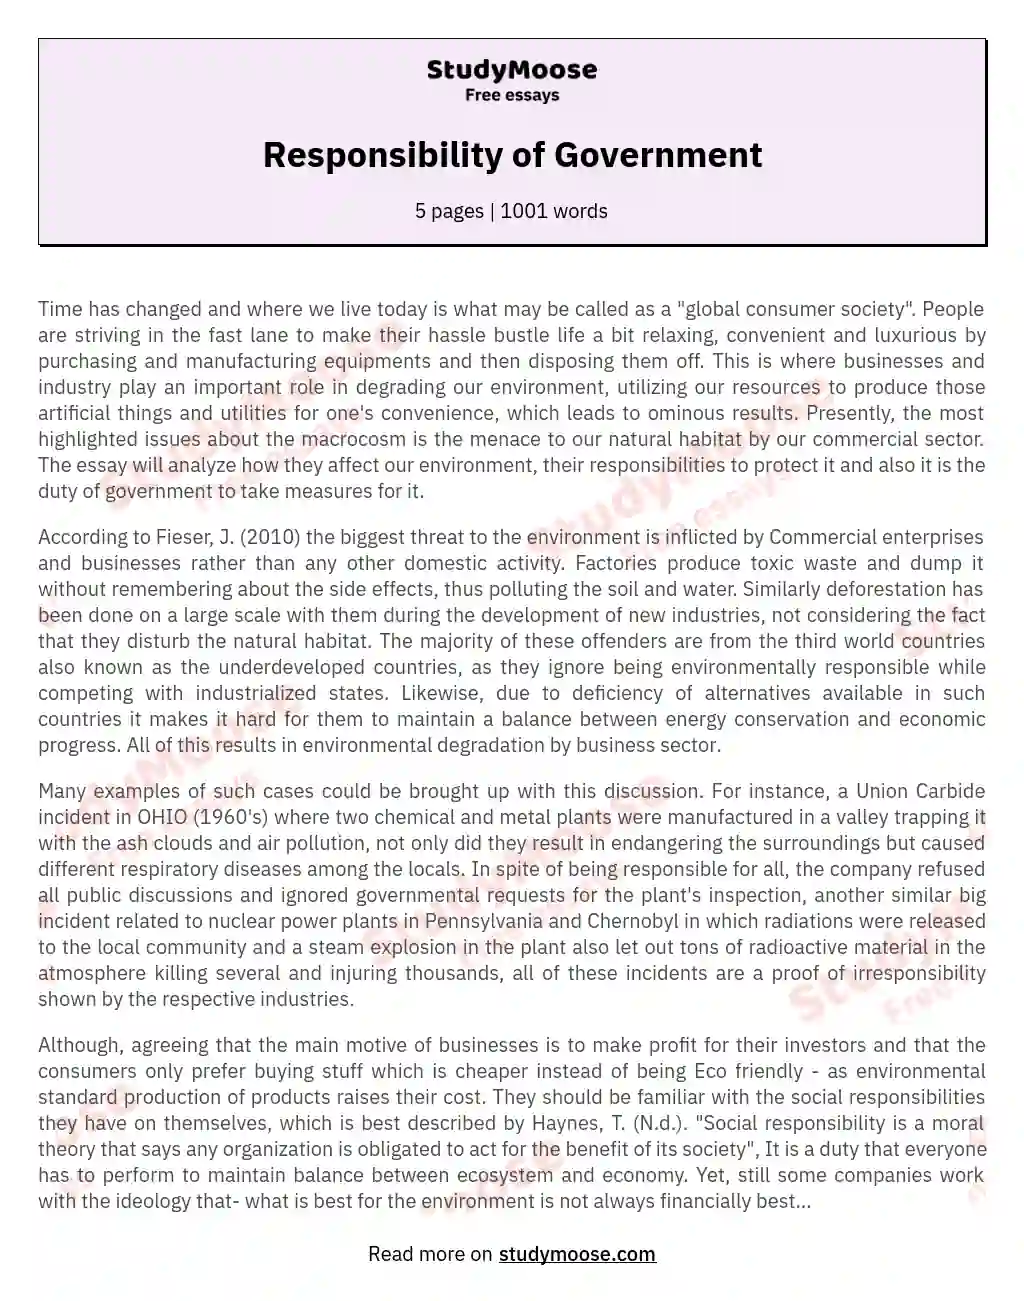 Responsibility of Government essay